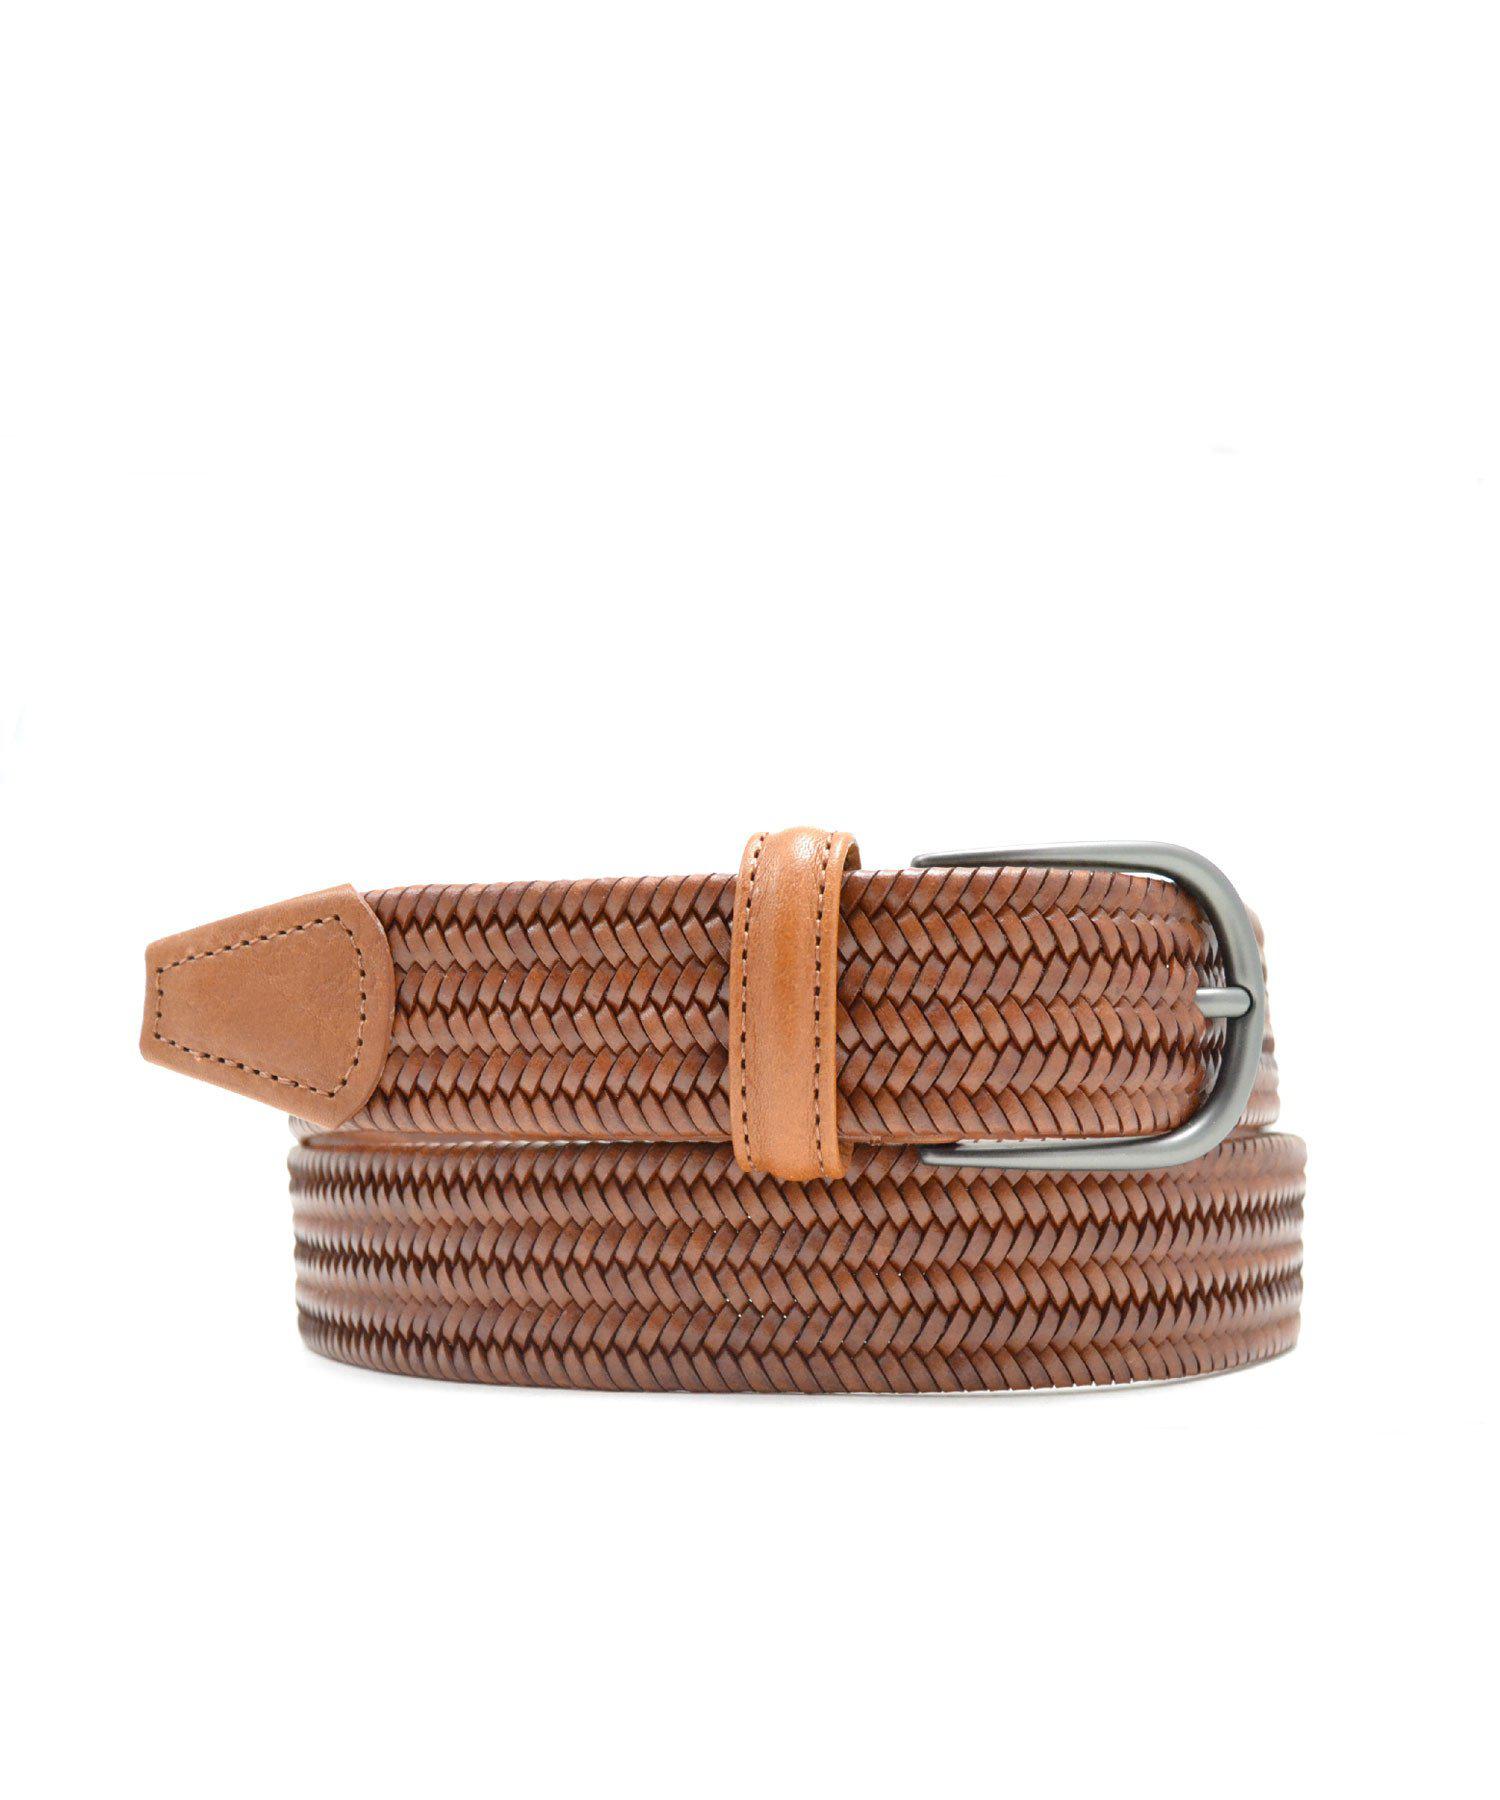 Lyst - Andersons Light Brown Woven Leather Belt in Brown for Men